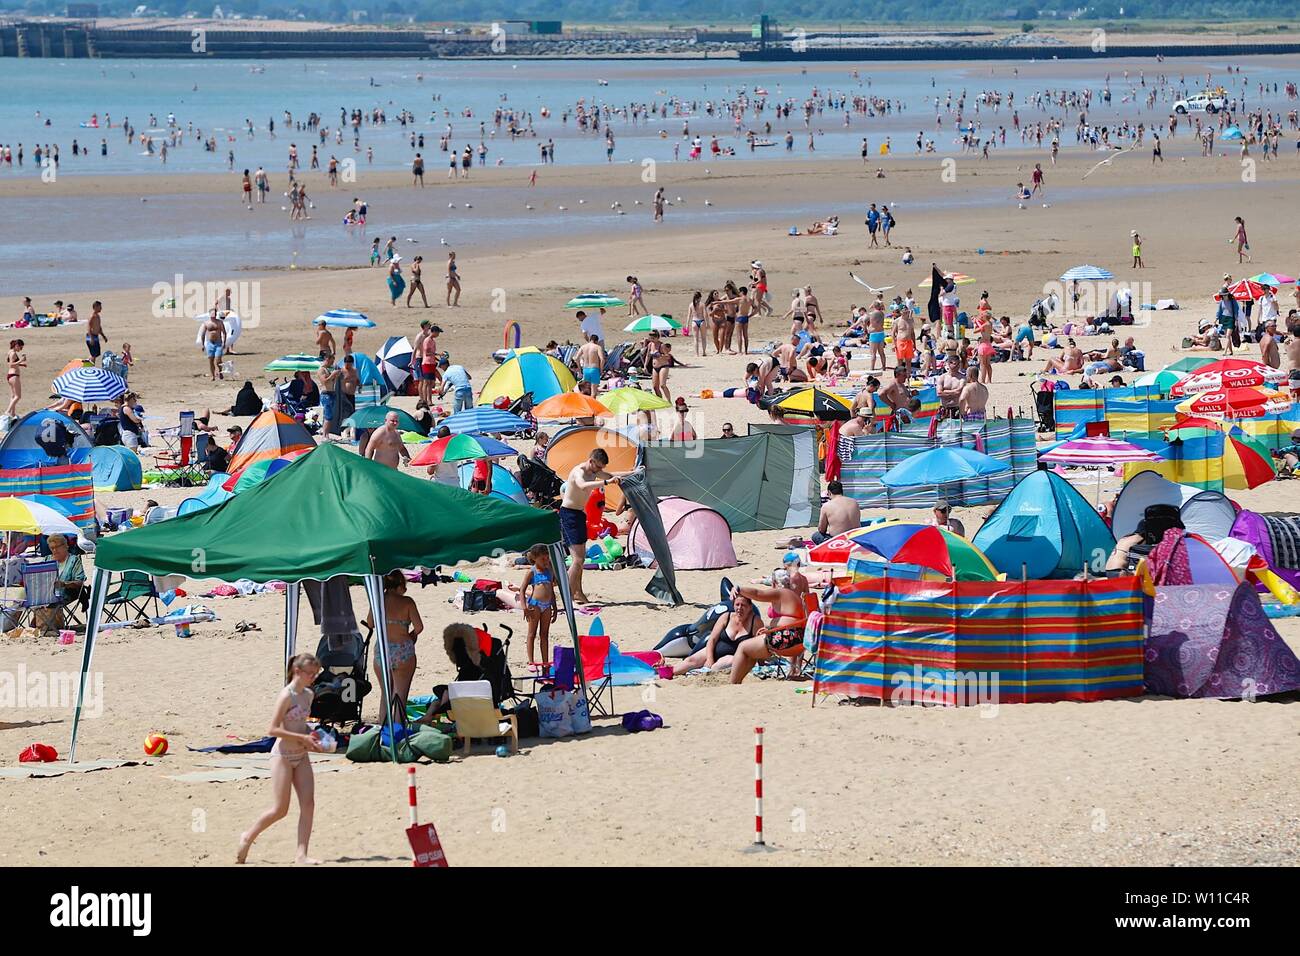 Camber, East Sussex, UK. 29 Jun, 2019. UK Weather: The record breaking heatwave in Europe has now hit the shores of Britain. The Camber Sands beach in East Sussex is busy and crowded with sun seekers taking advantage of the very hot summer weather. ©Paul Lawrenson 2019, Photo Credit: Paul Lawrenson/Alamy Live News Stock Photo